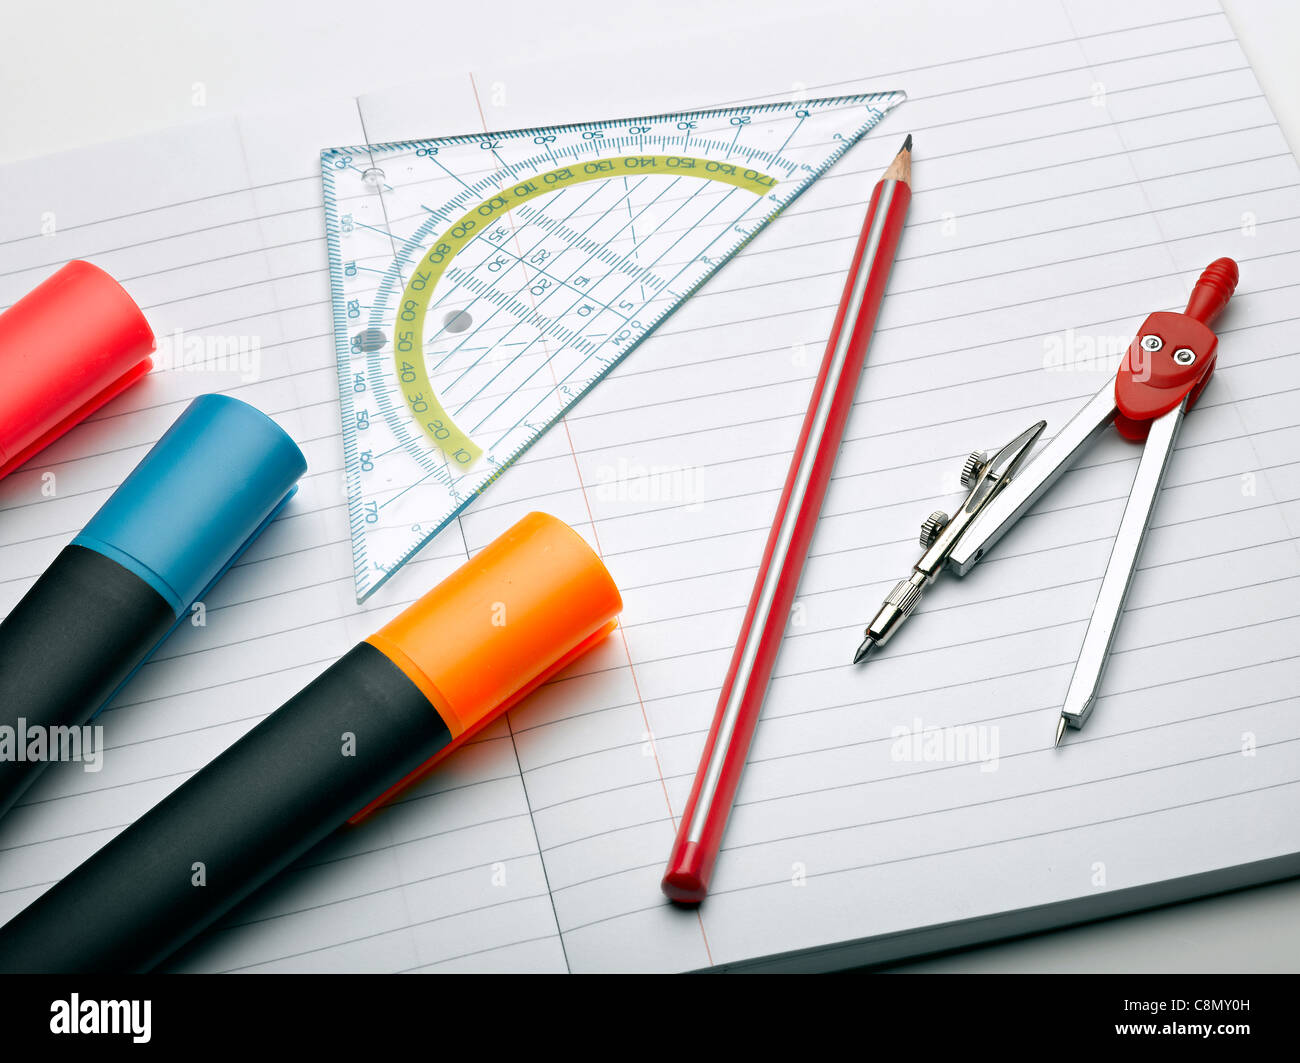 Technical drafting tools, Pantograph, rulers, compass, calculator and other  paraphernalia, Technology Museum, Berlin, Germany Stock Photo - Alamy